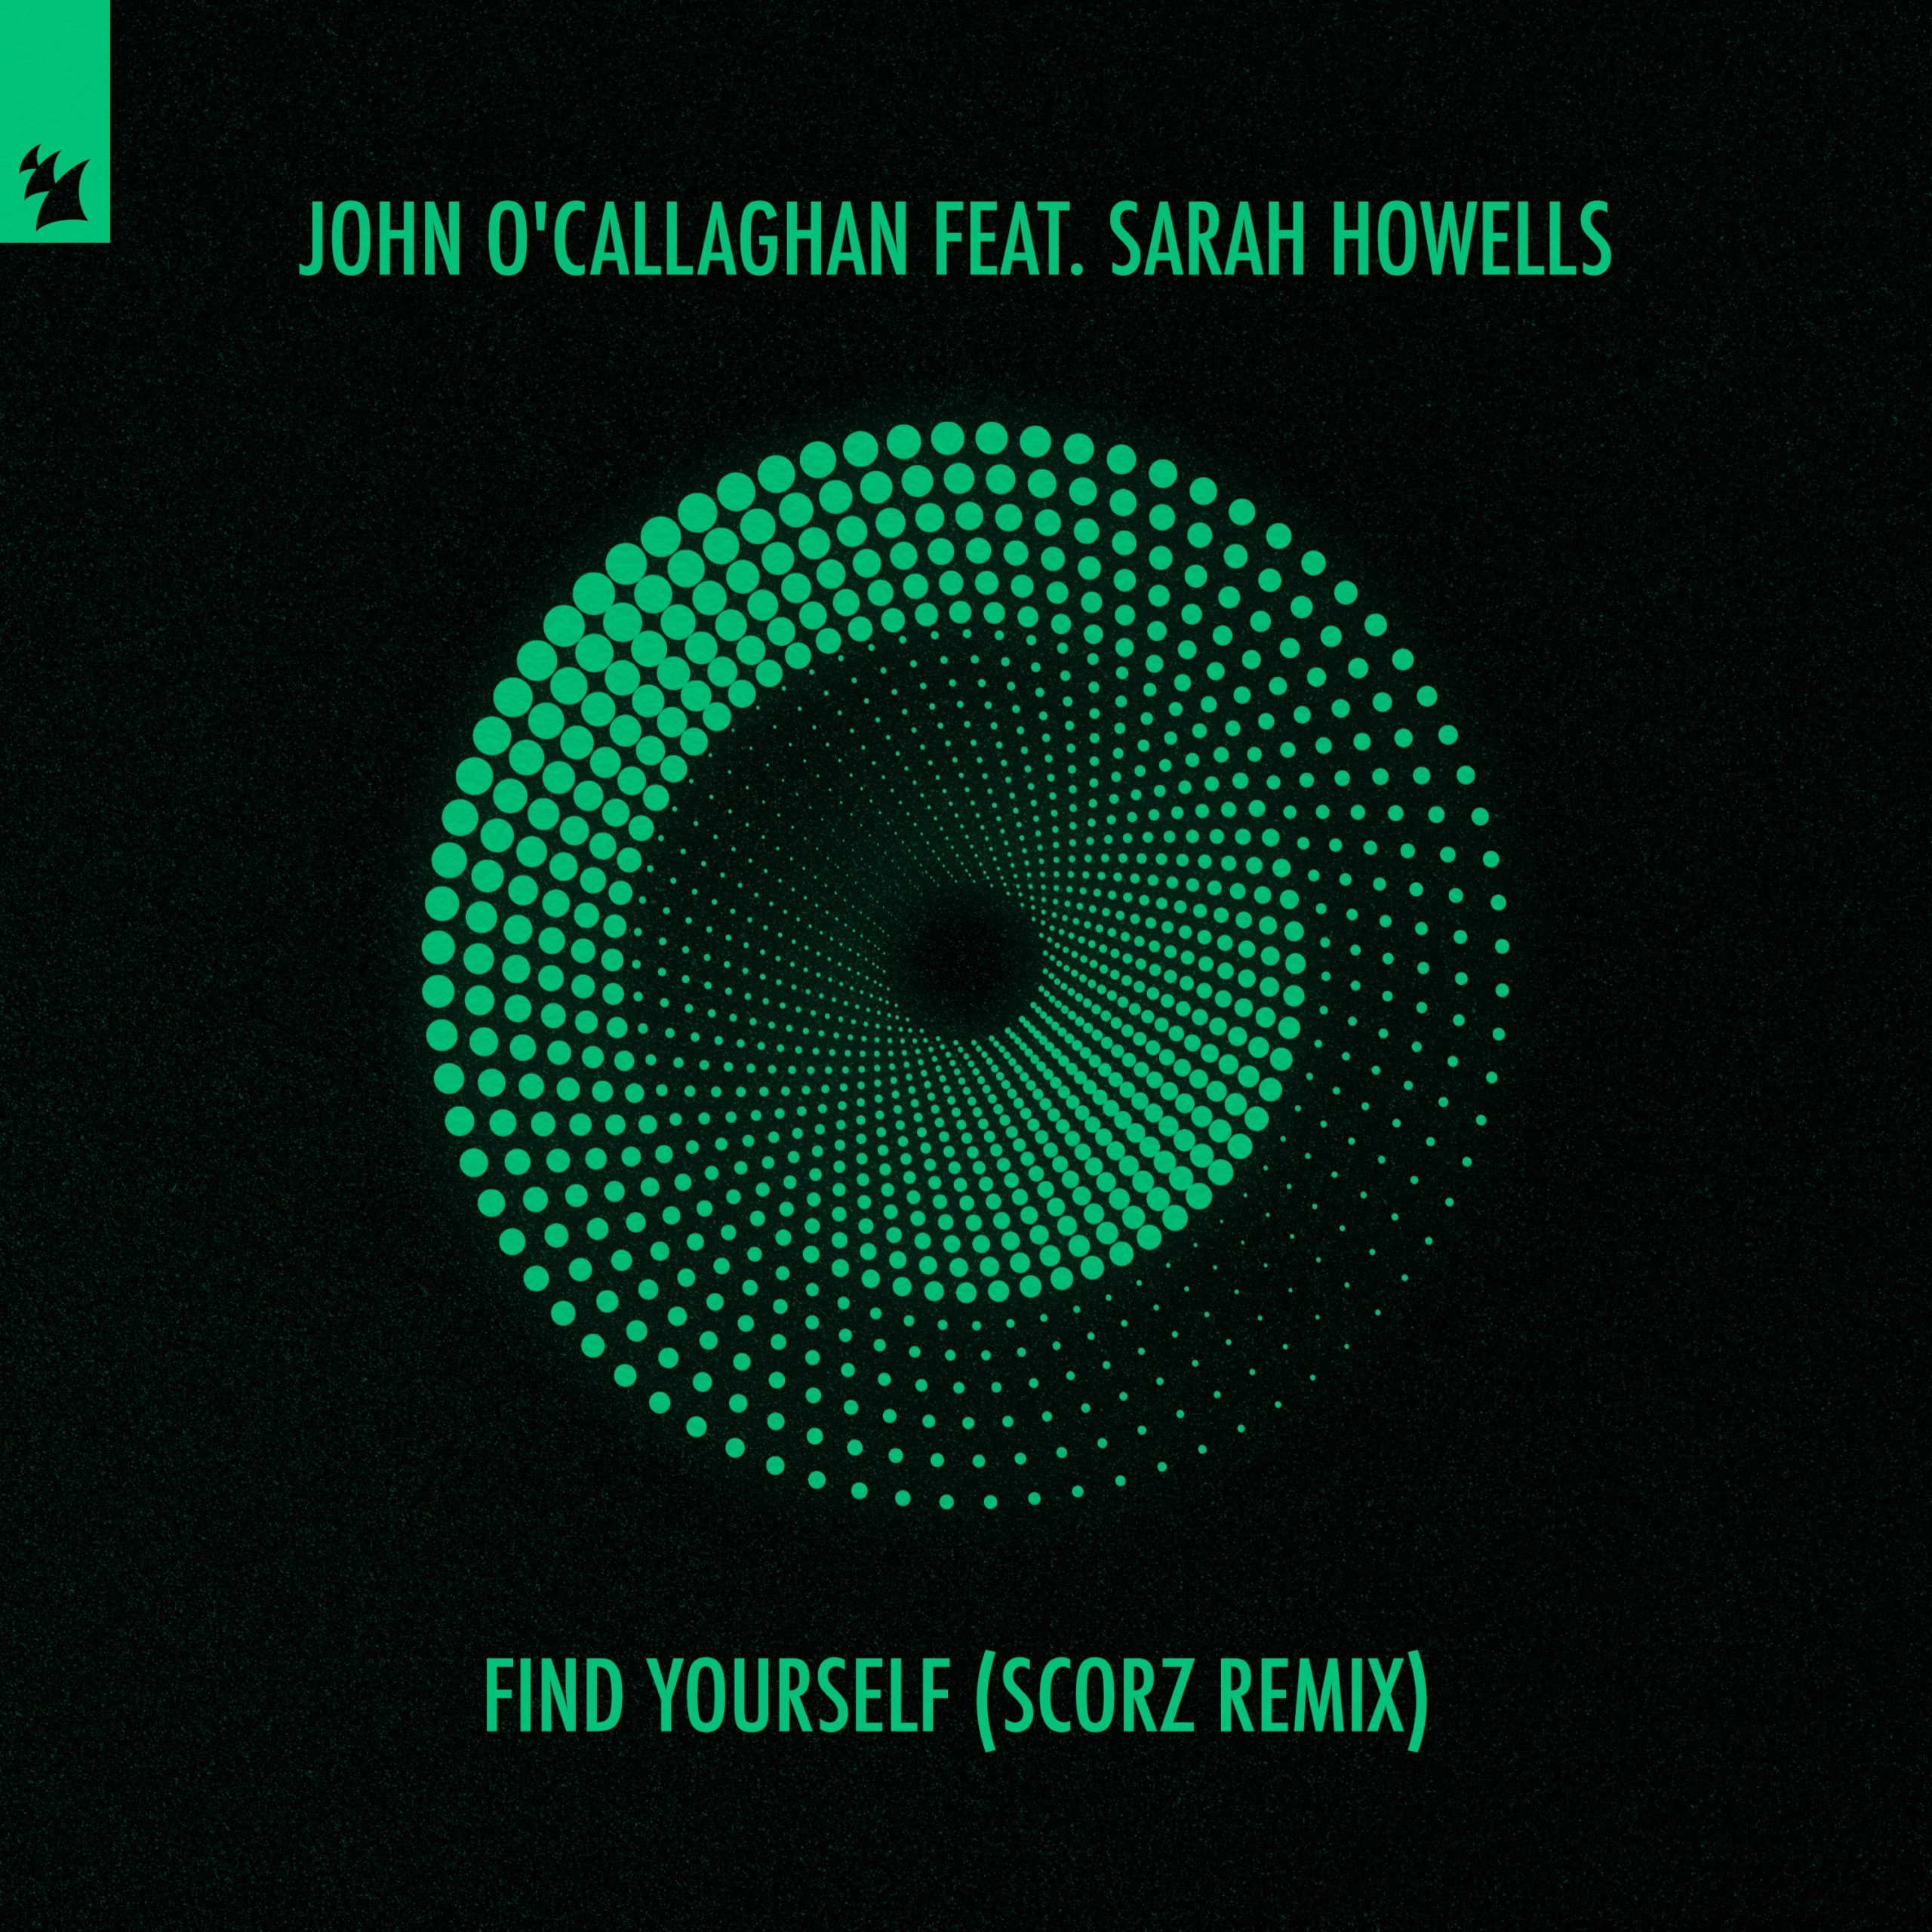 John O’Callaghan feat. Sarah Howells presents Find Your Self (Scorz Remix) on Armada Music